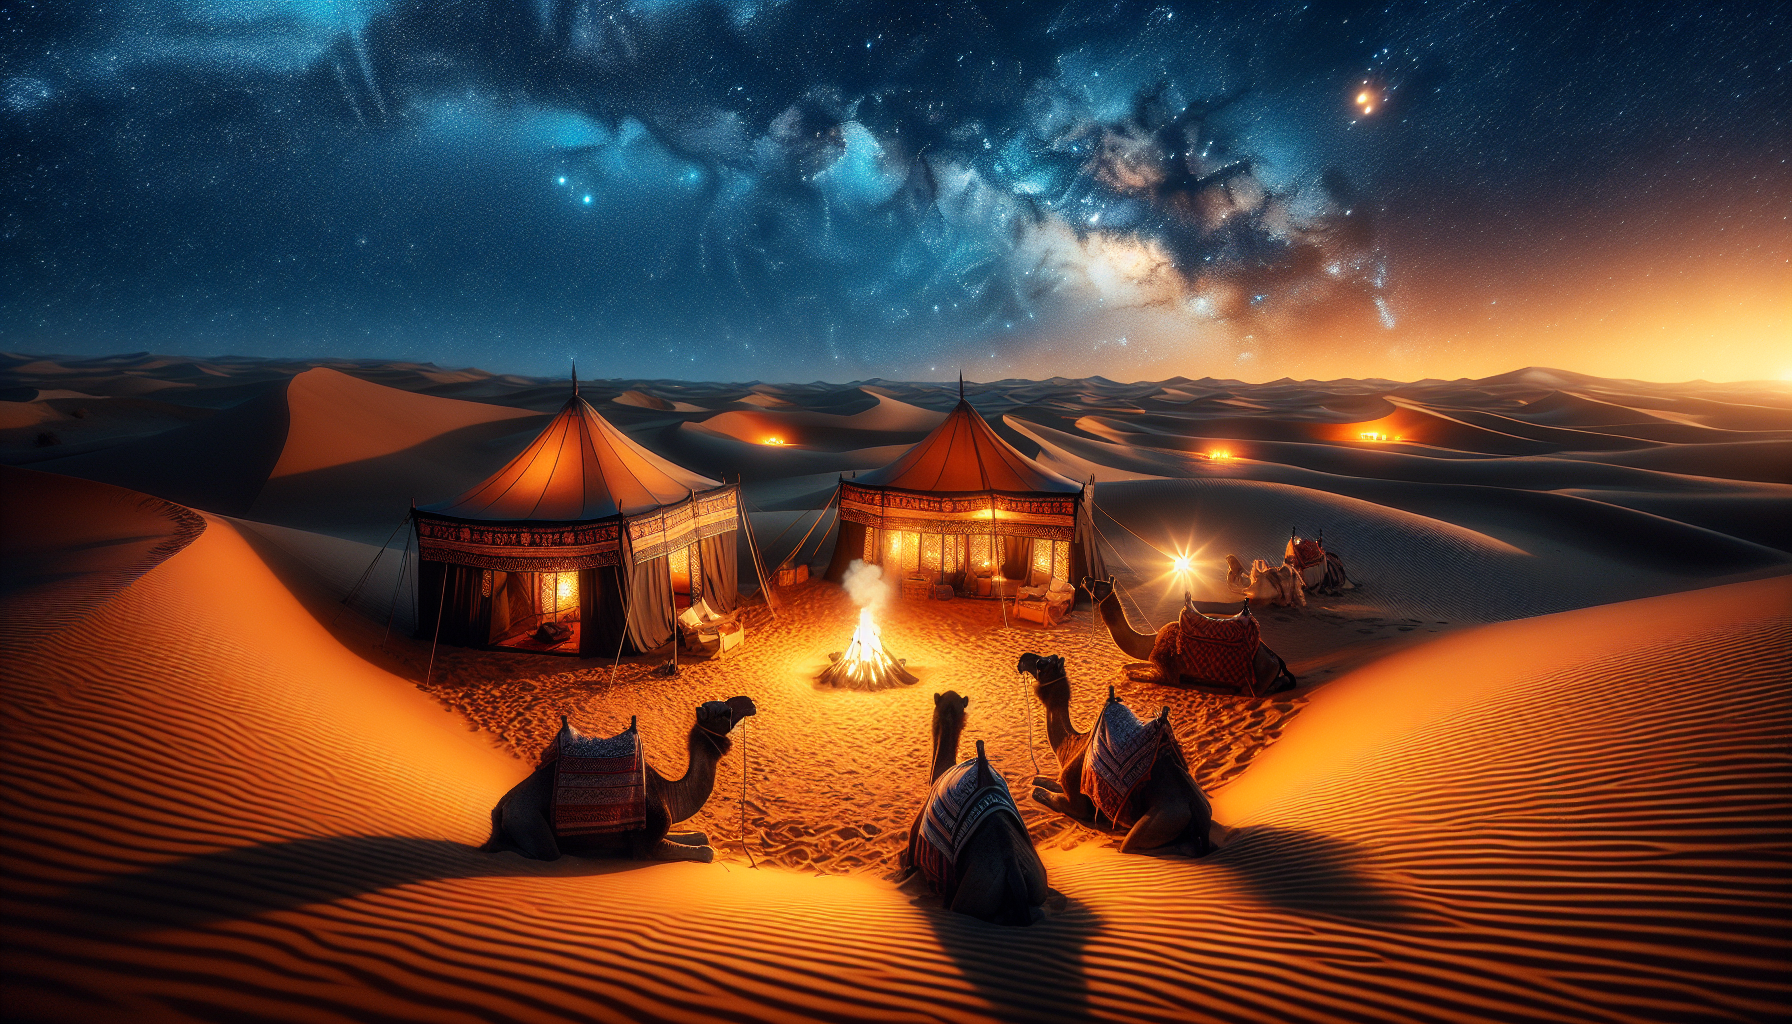 discover the thrill of bedouin desert camping and unlock the ultimate adventure getaway experience amidst the mesmerizing sand dunes and starlit nights.